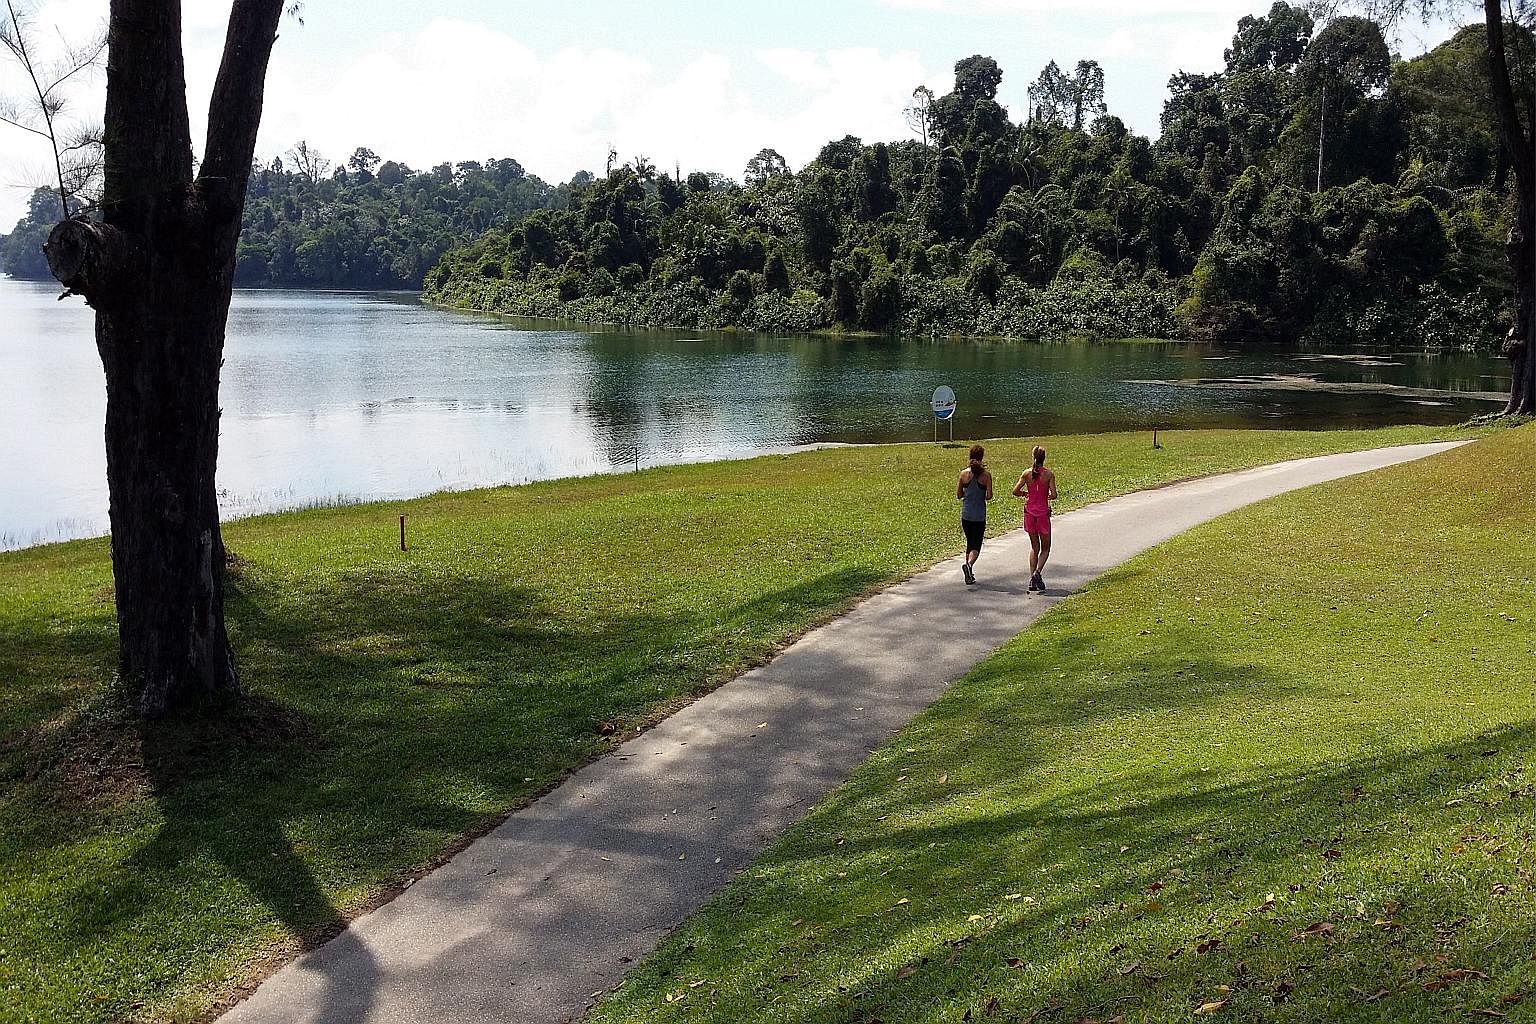 The ability of nature, in areas like MacRitchie Reservoir (above), to improve mental health and well-being is well-documented.